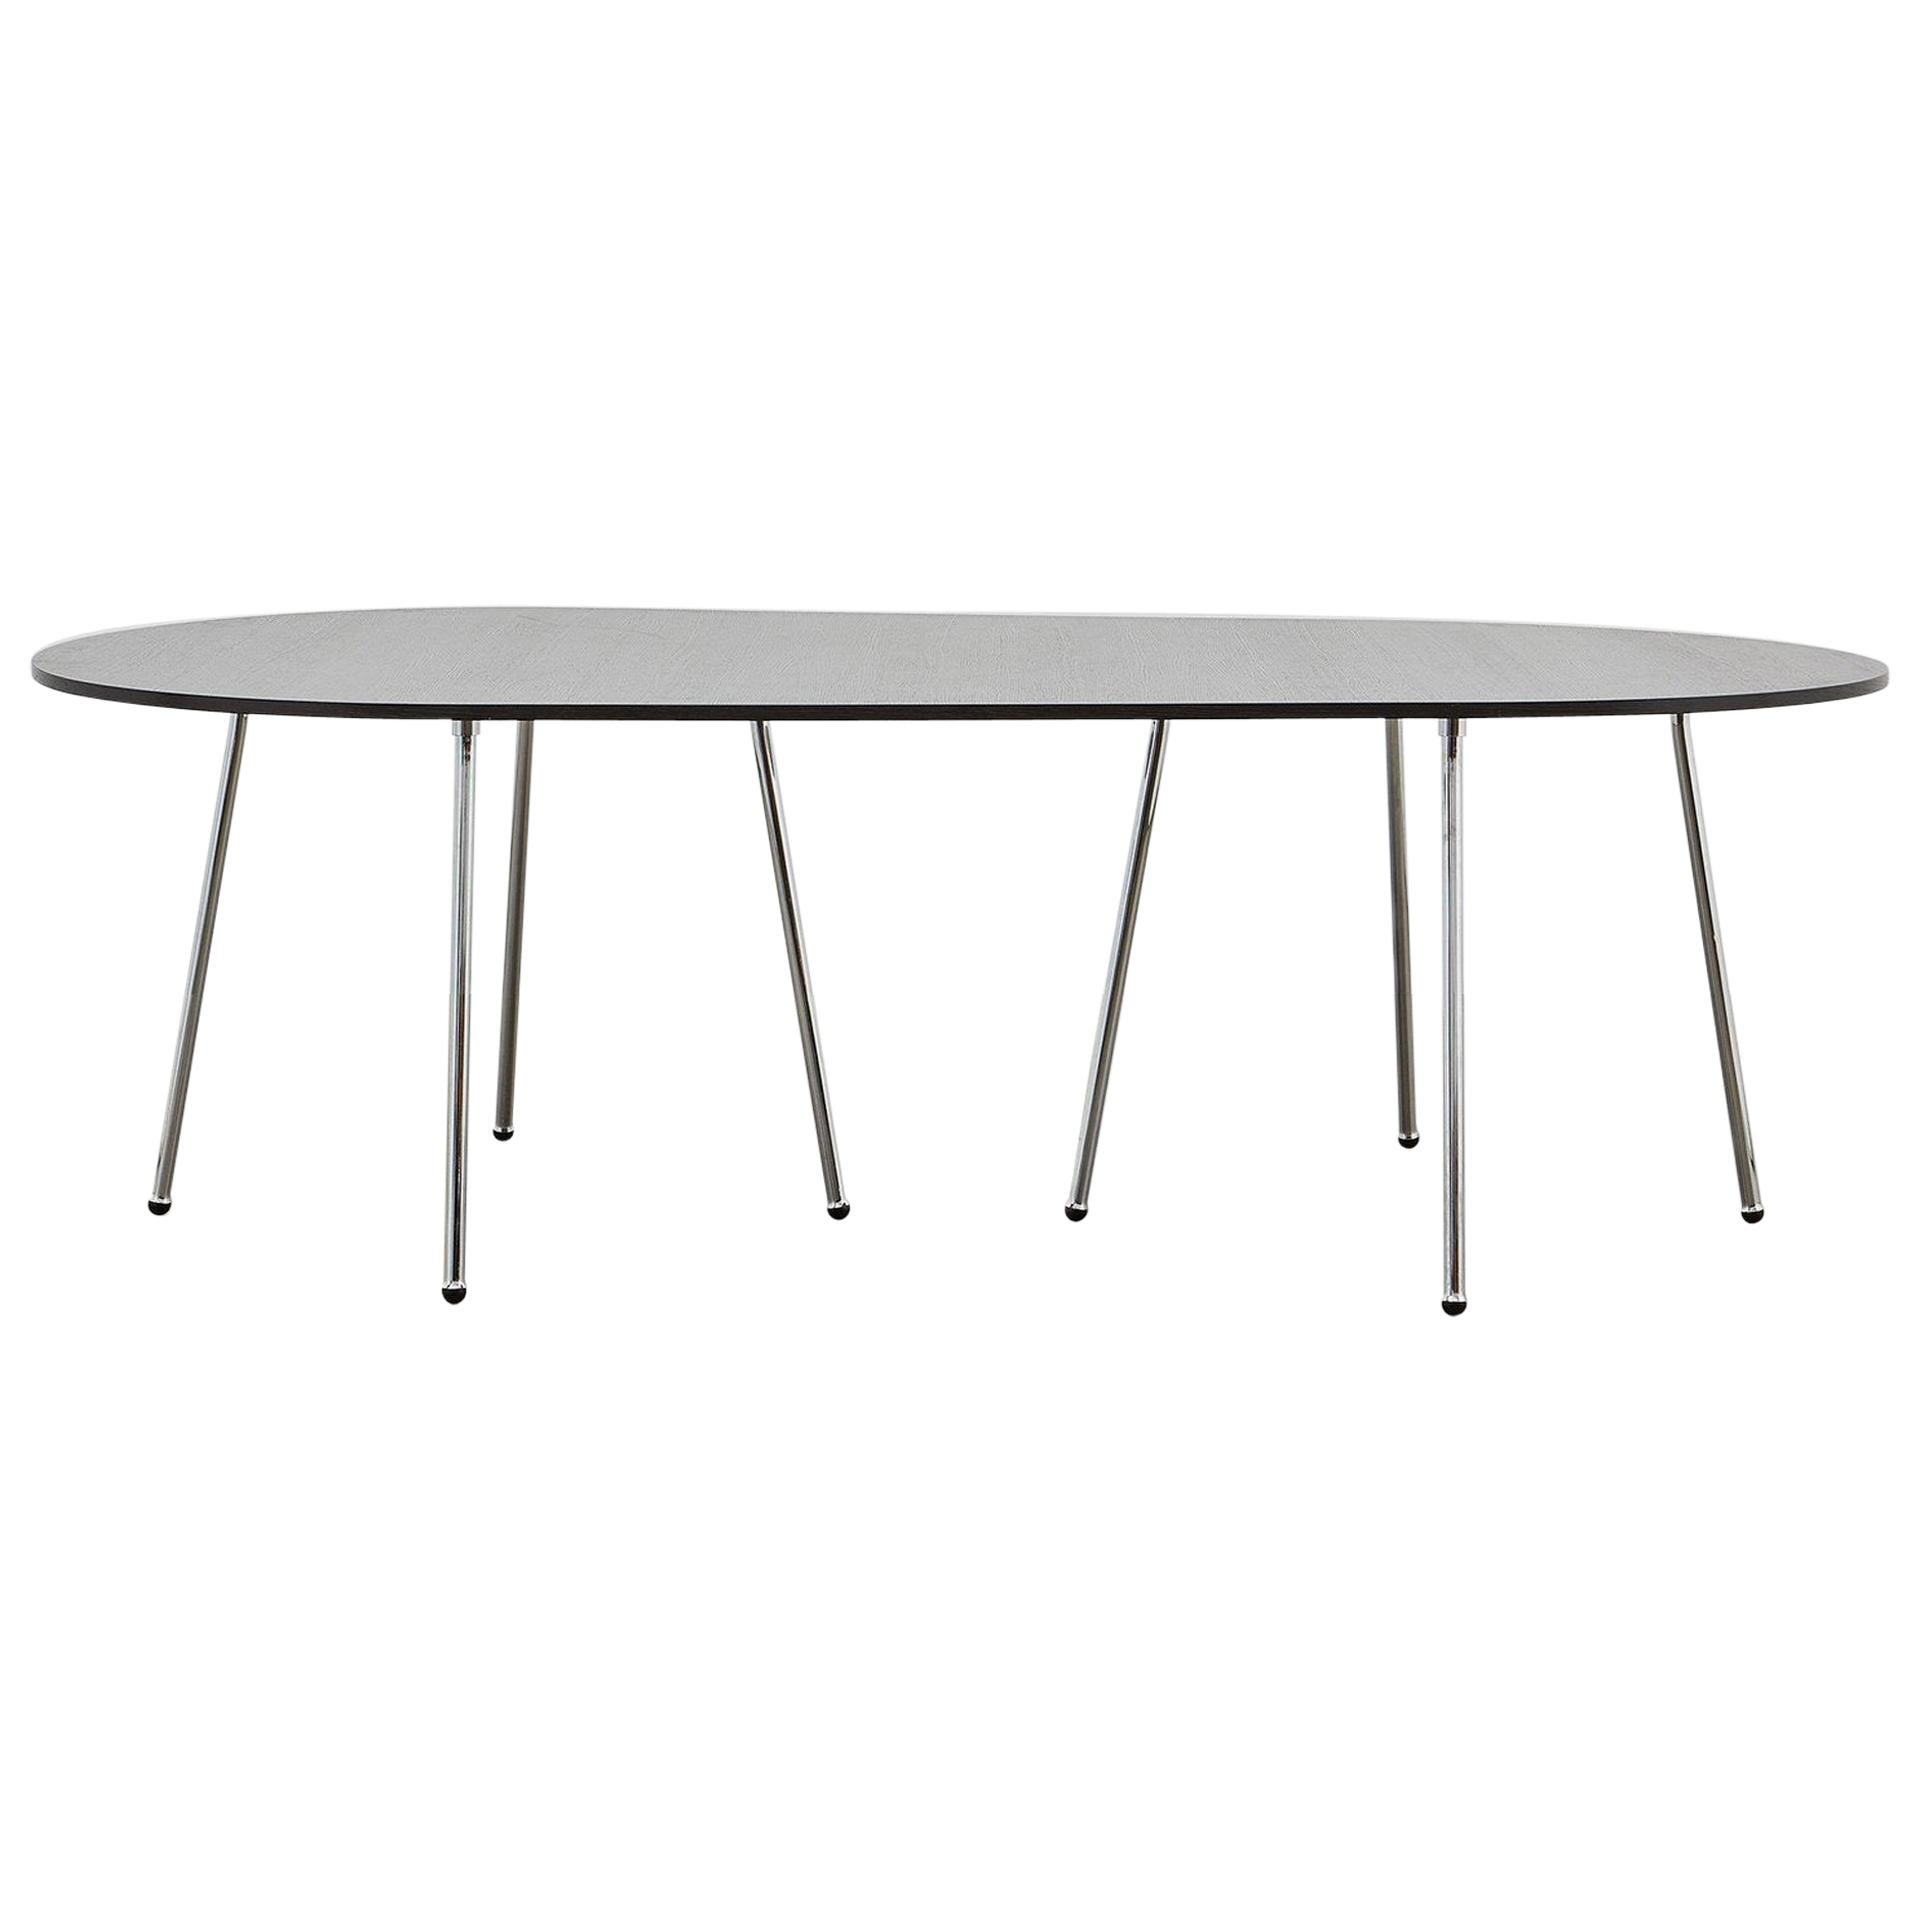 PH Dining Table, 1270x2370mm, chrome, black oak veneer table plate and edge For Sale